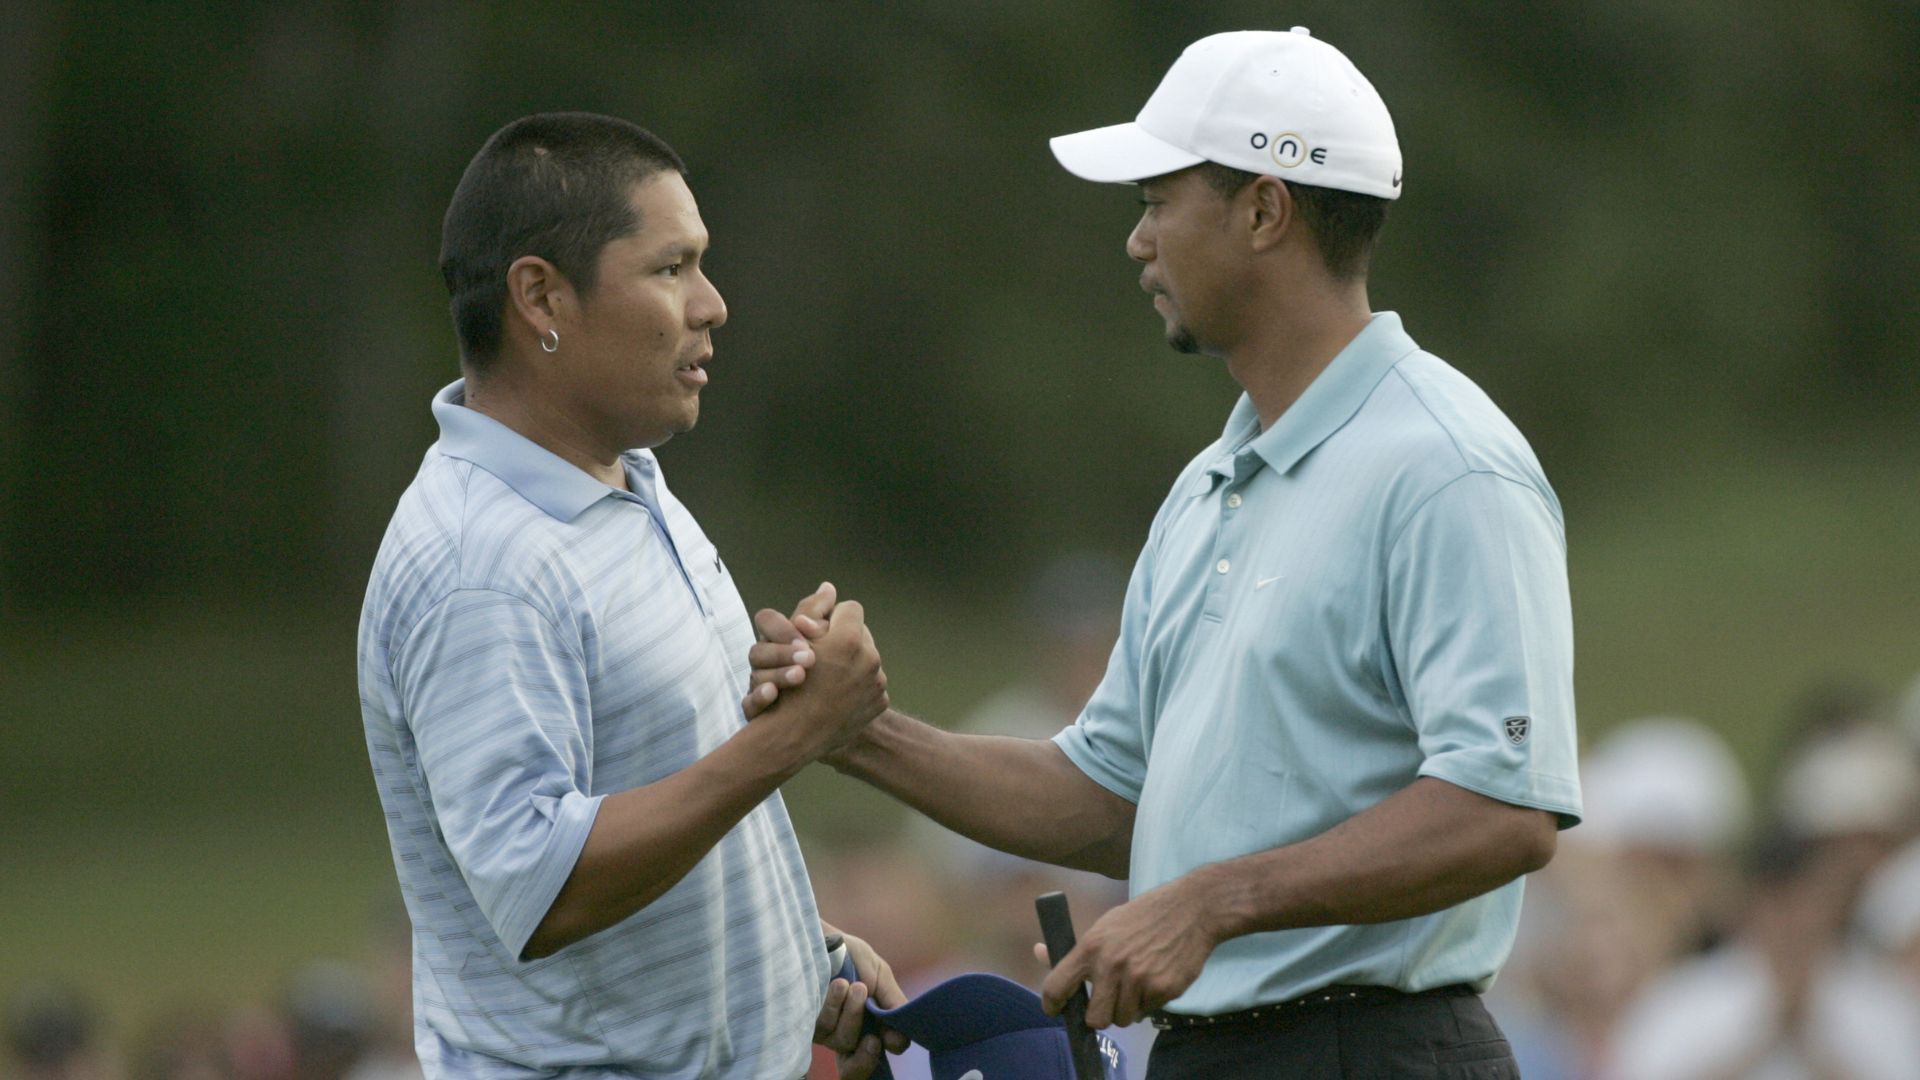 Notah Begay III: Tiger Woods might surprise everyone and play this fall